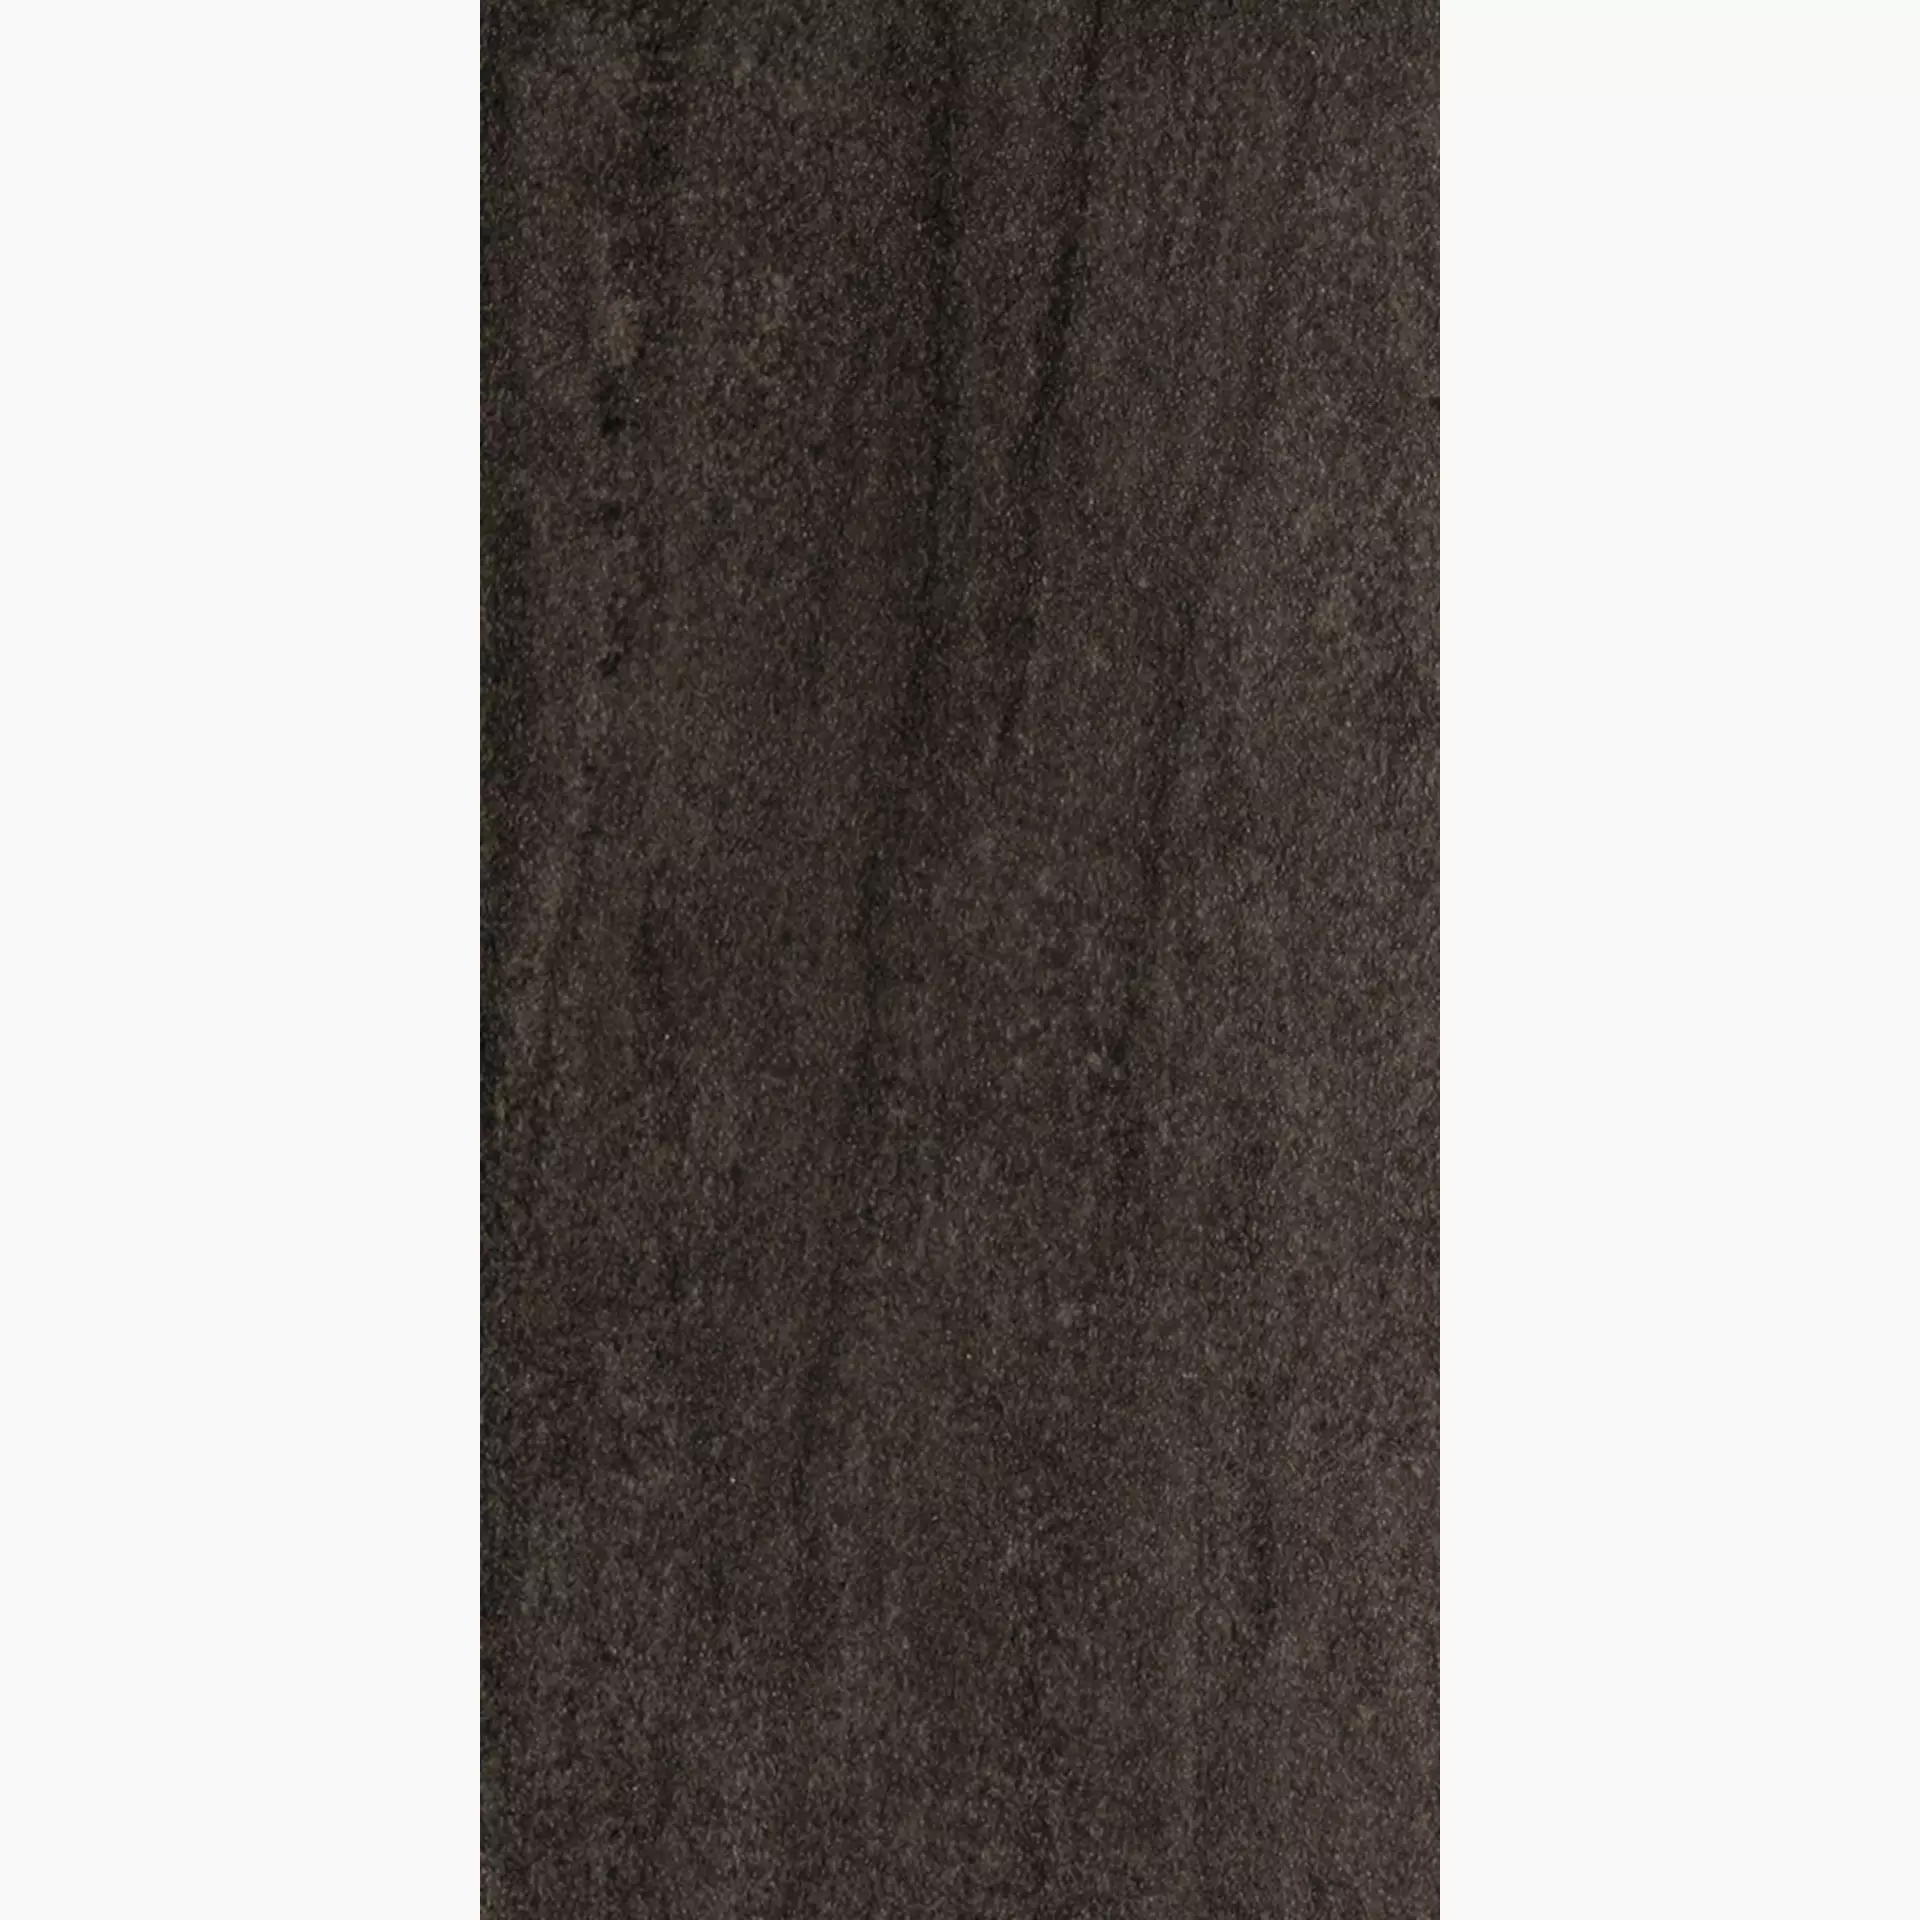 Rondine Contract Anthracite Lappato J83759 30x60cm rectified 9,5mm